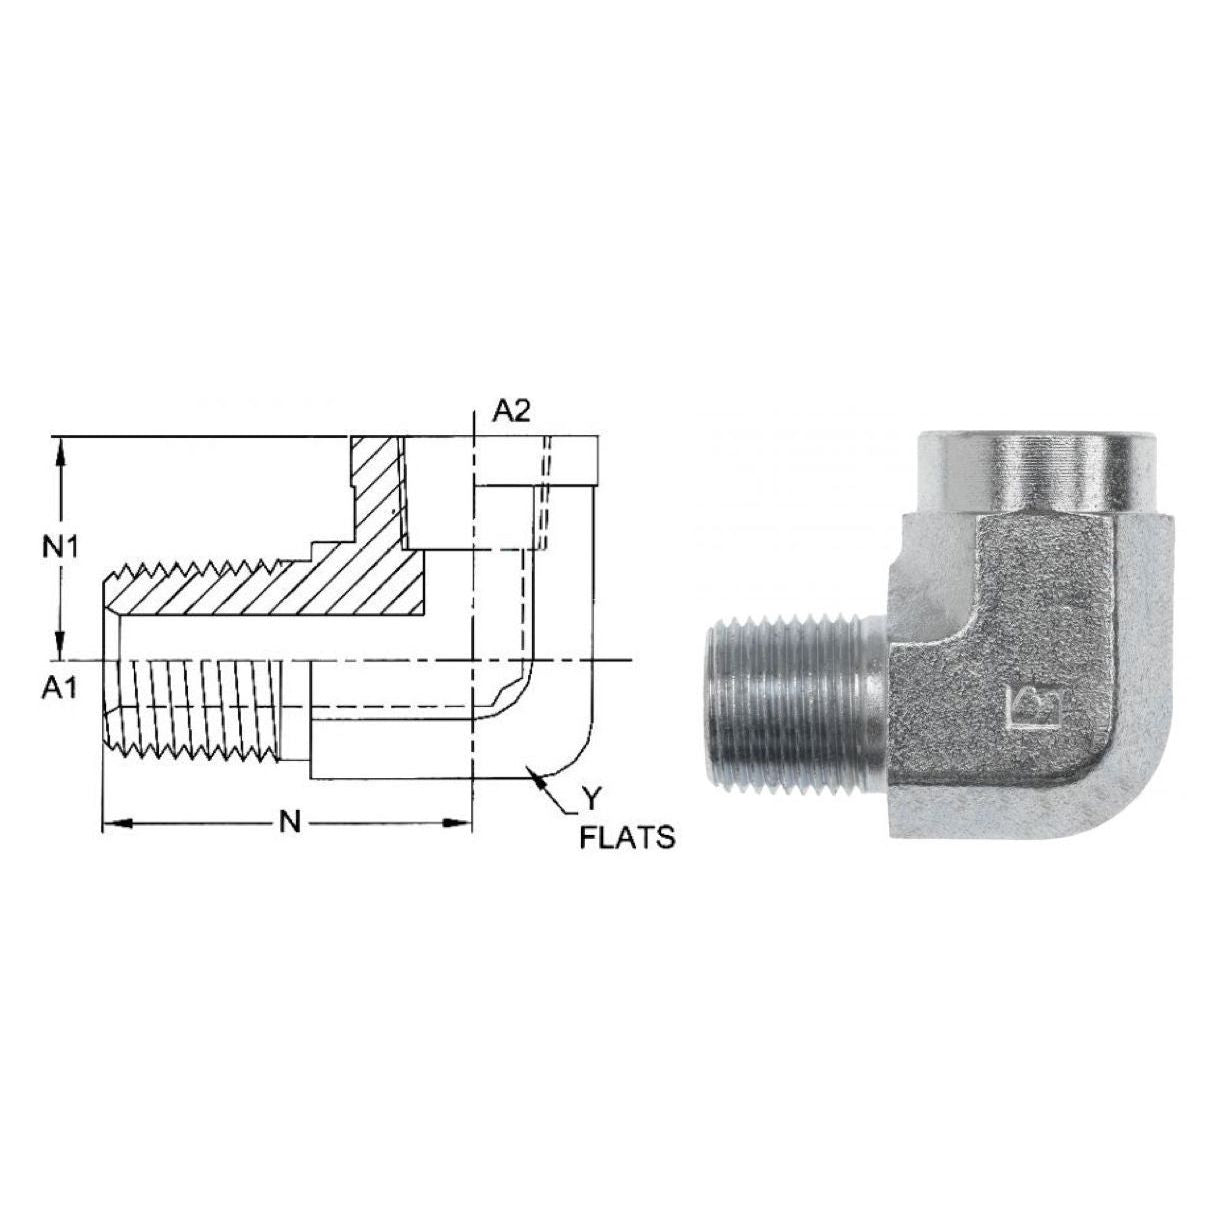 5502-02-02-SS : OneHydraulics 90-Degree Street Elbow, 0.125 (1/8) Male NPT x 0.125 (1/8) Female NPT, Stainless Steel, 6000psi